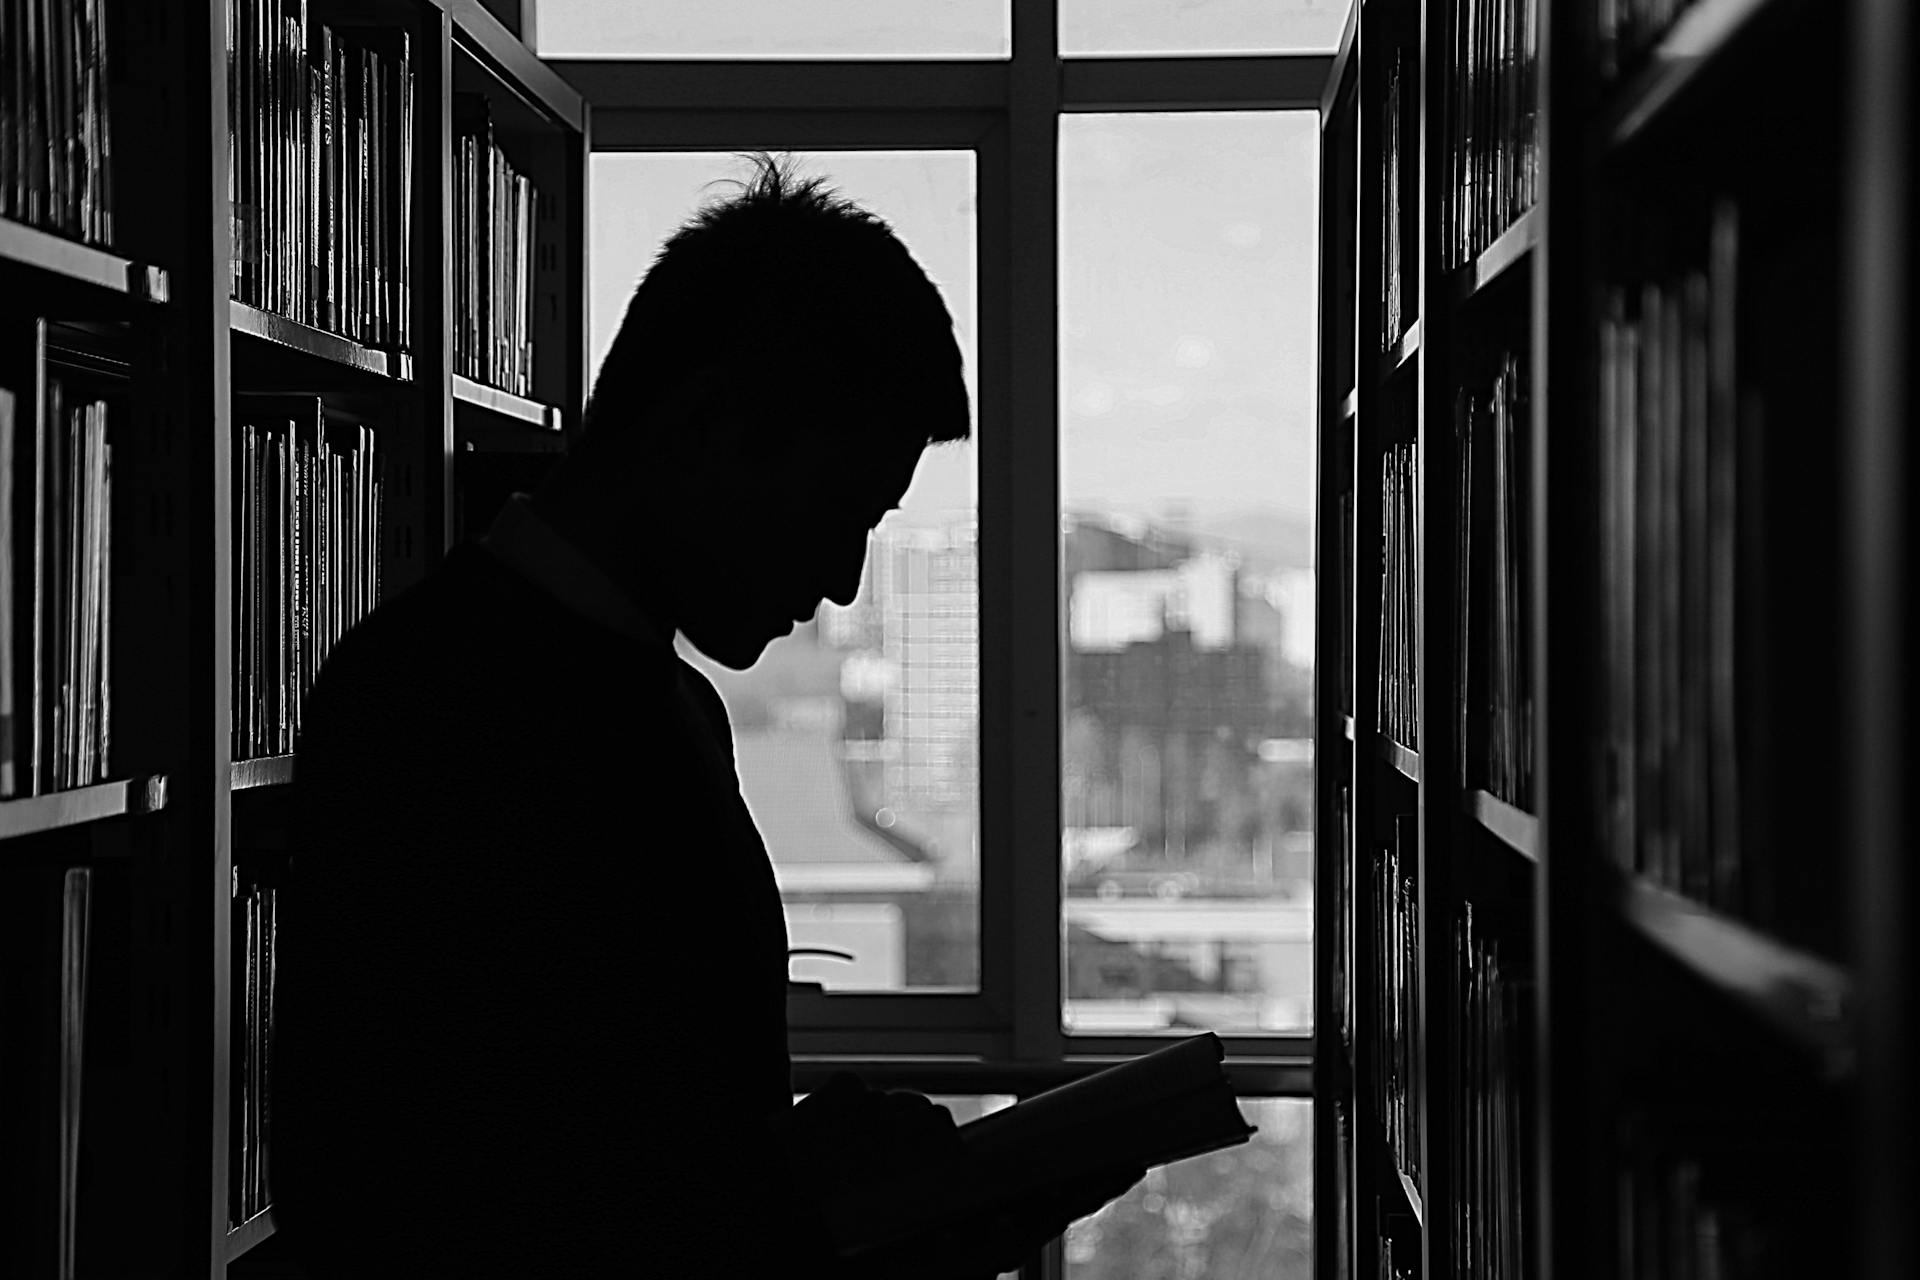 A silhouette of a man in a library | Source: Pexels